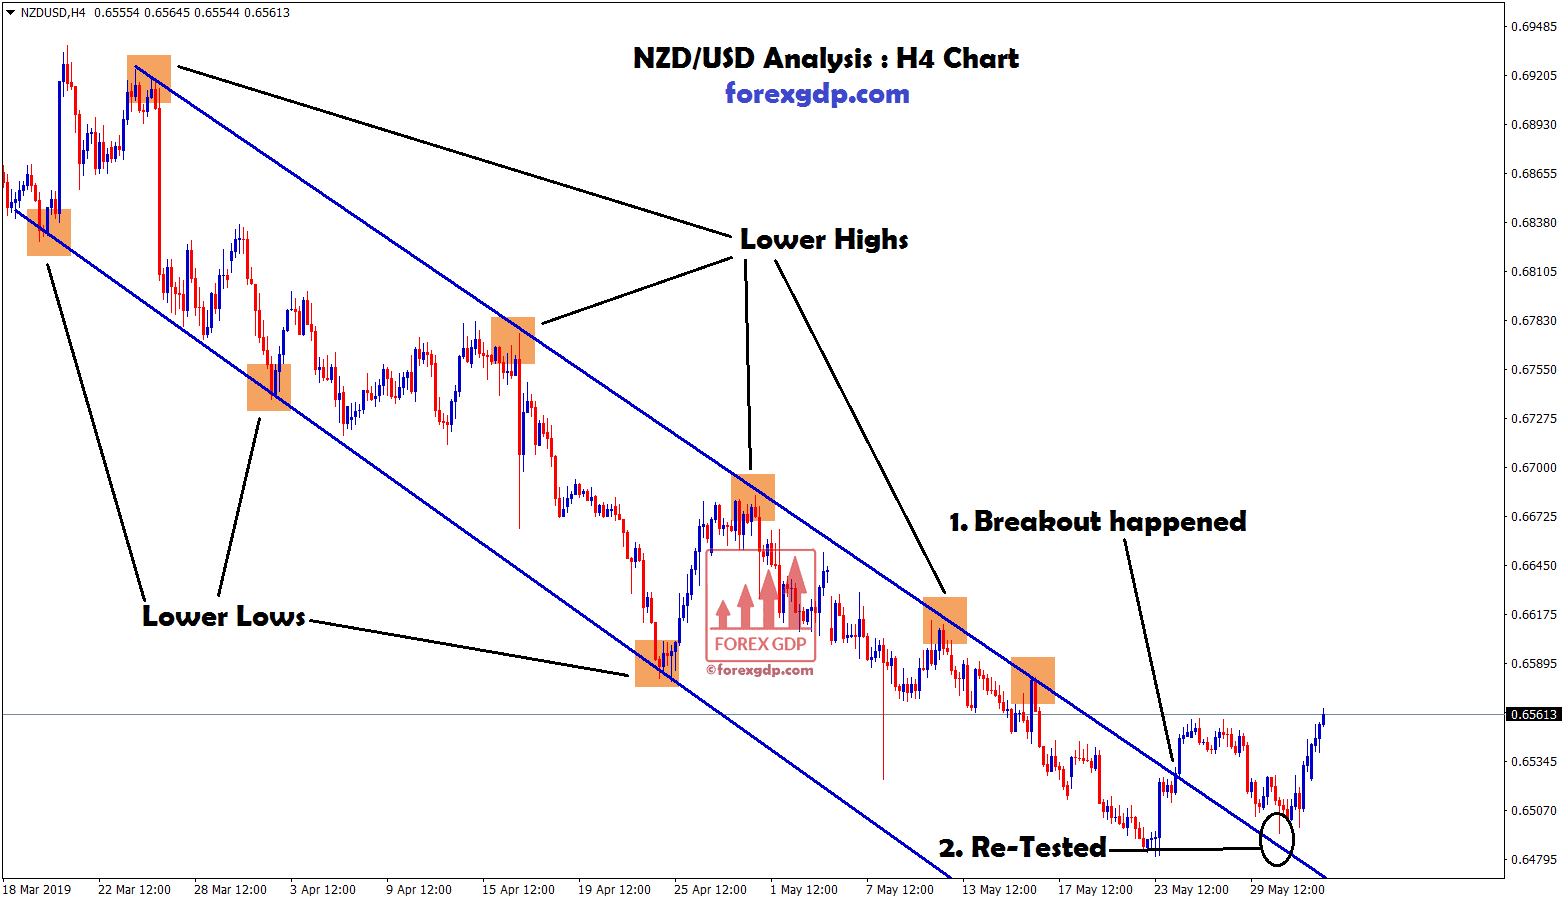 nzd/usd broken and re-tested the lower highs level